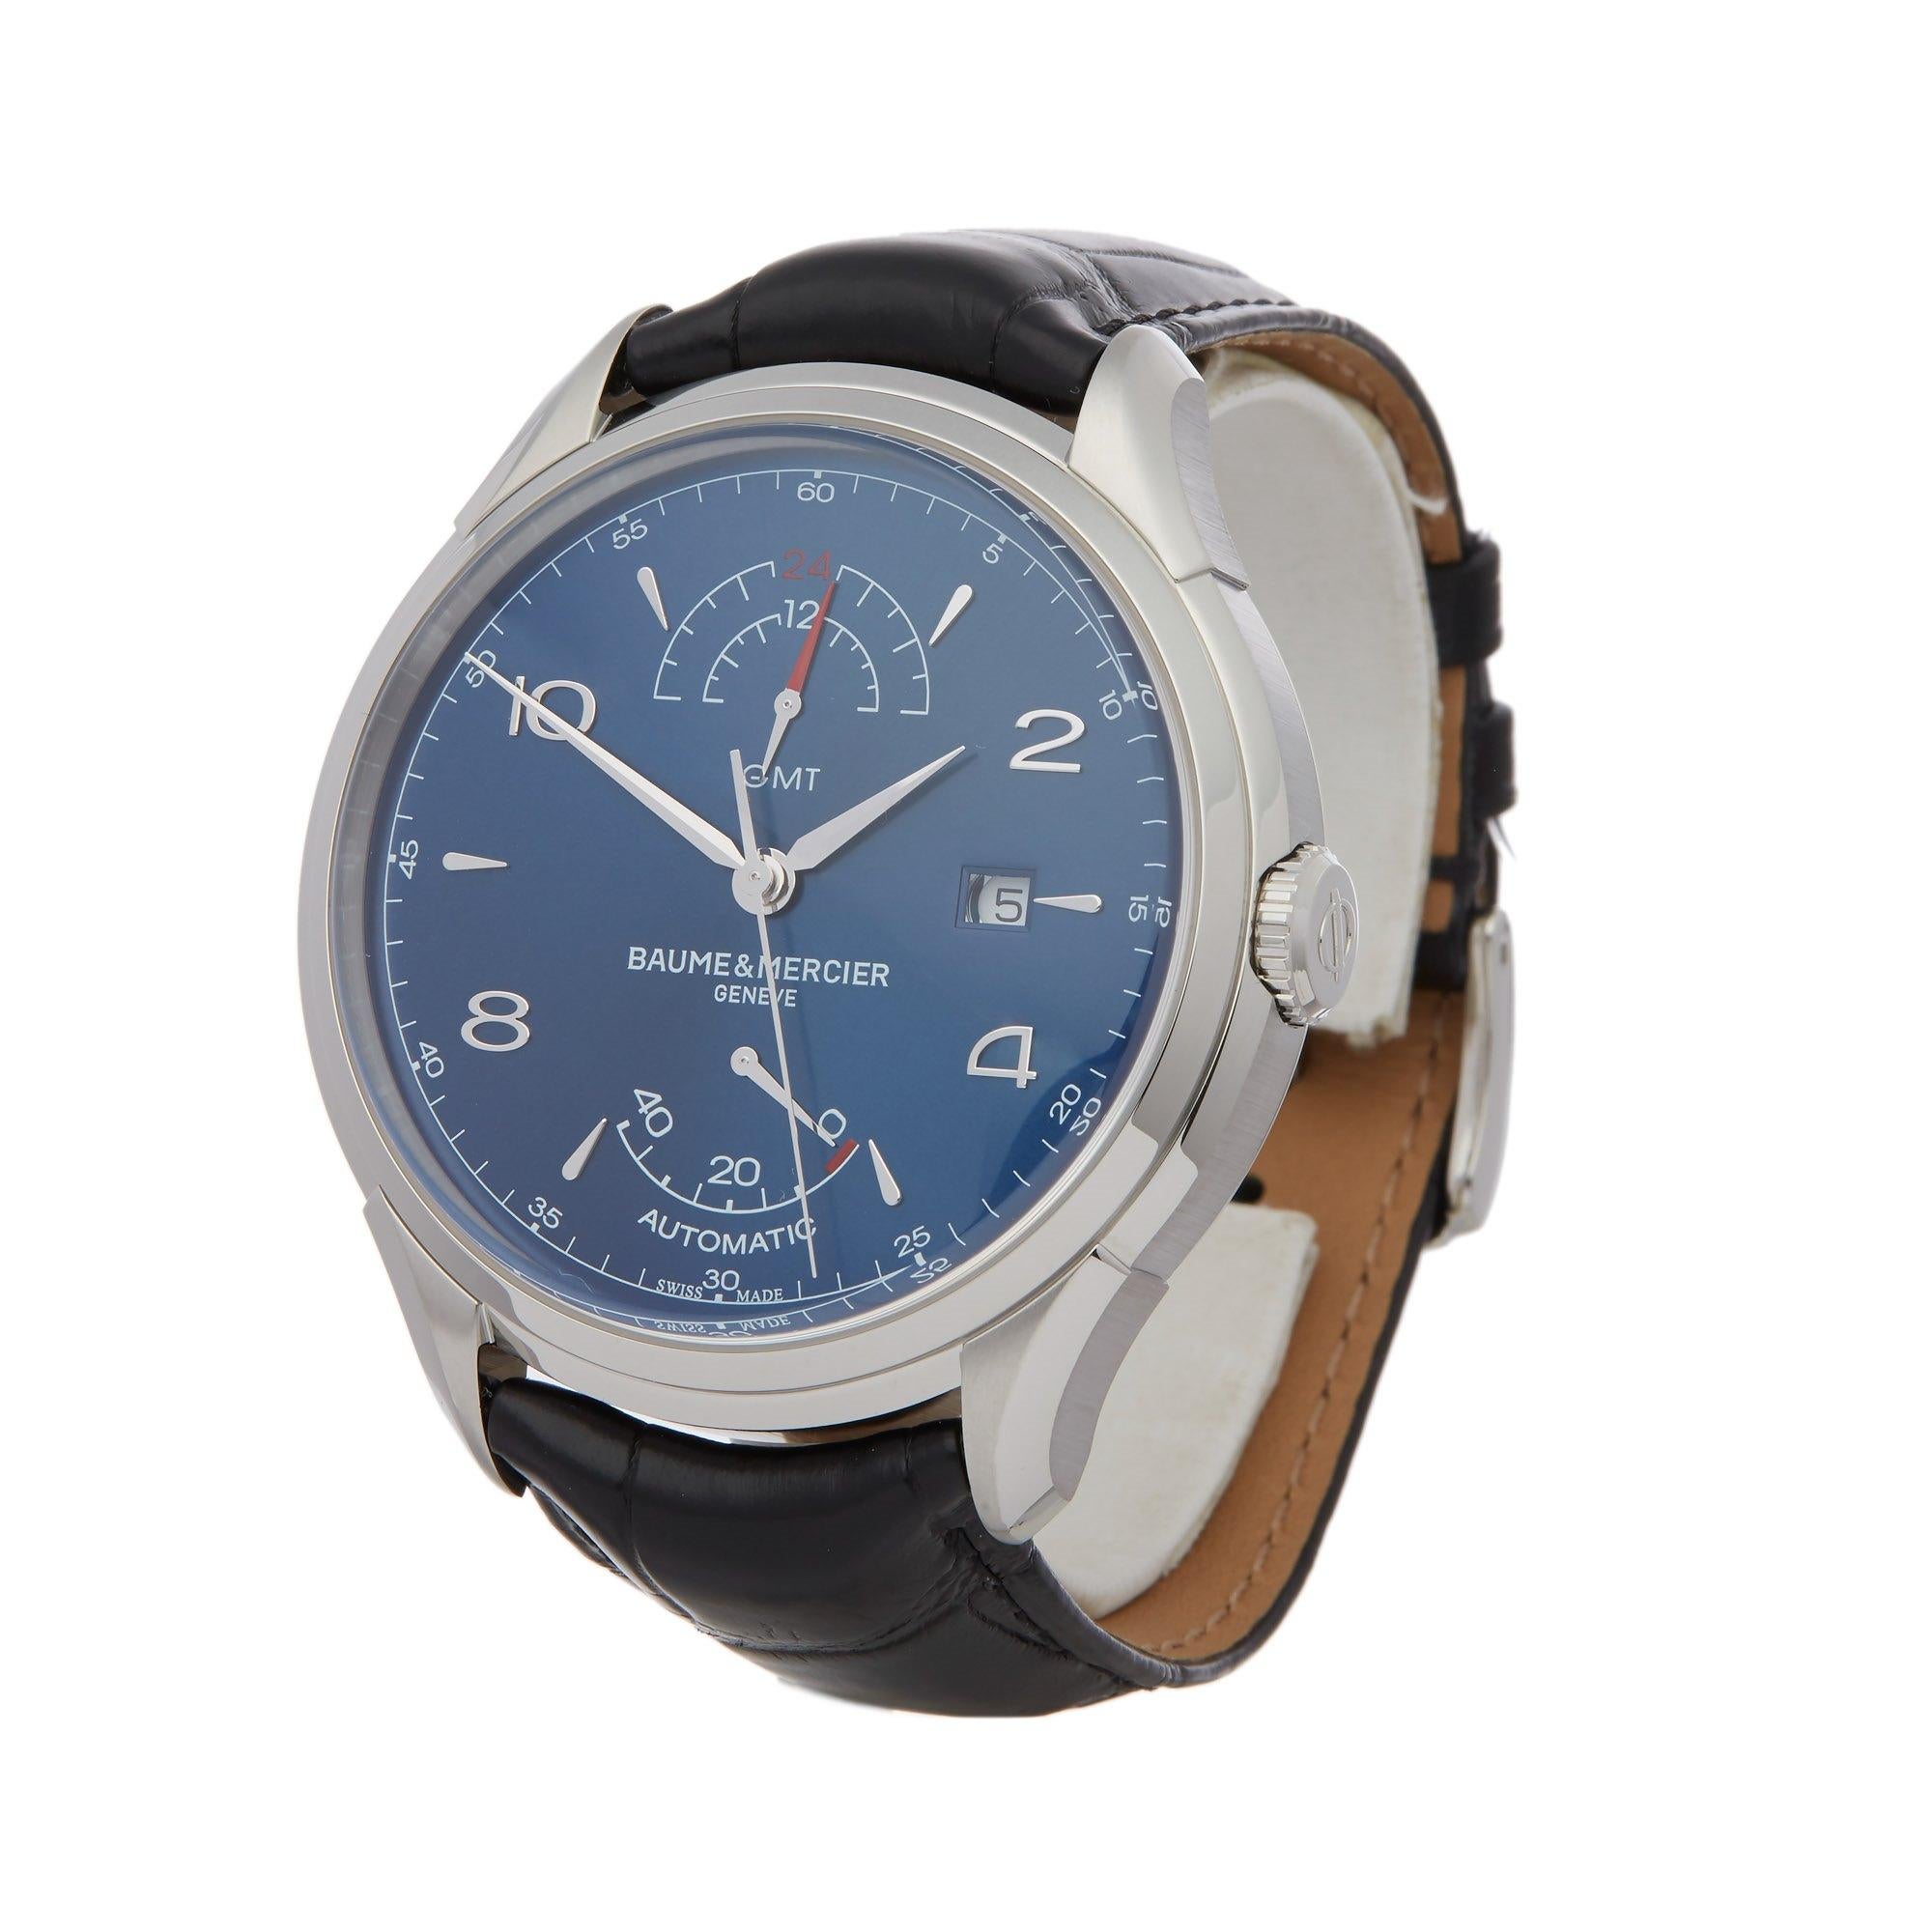 Xupes Reference: COM002526
Manufacturer: Baume & Mercier
Model: Clifton
Model Number: M0A10422
Age: 2020
Gender: Men
Complete With: Baume & Mercier Box, Manuals & Open Guarantee
Dial: Blue Arabic
Glass: Sapphire Crystal
Case Material: Stainless